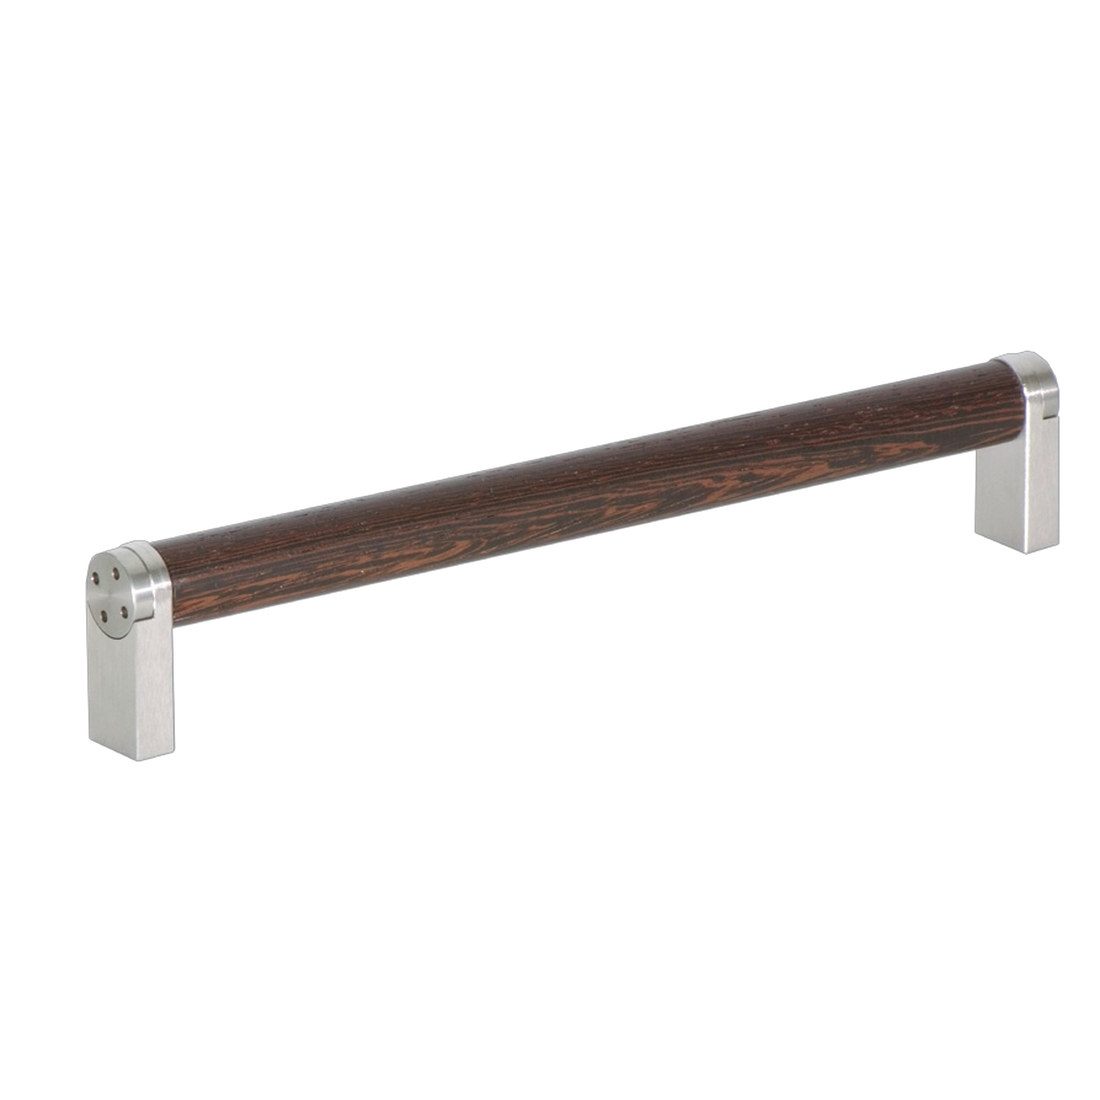 Cabinet handle Citus, system handle, wenge